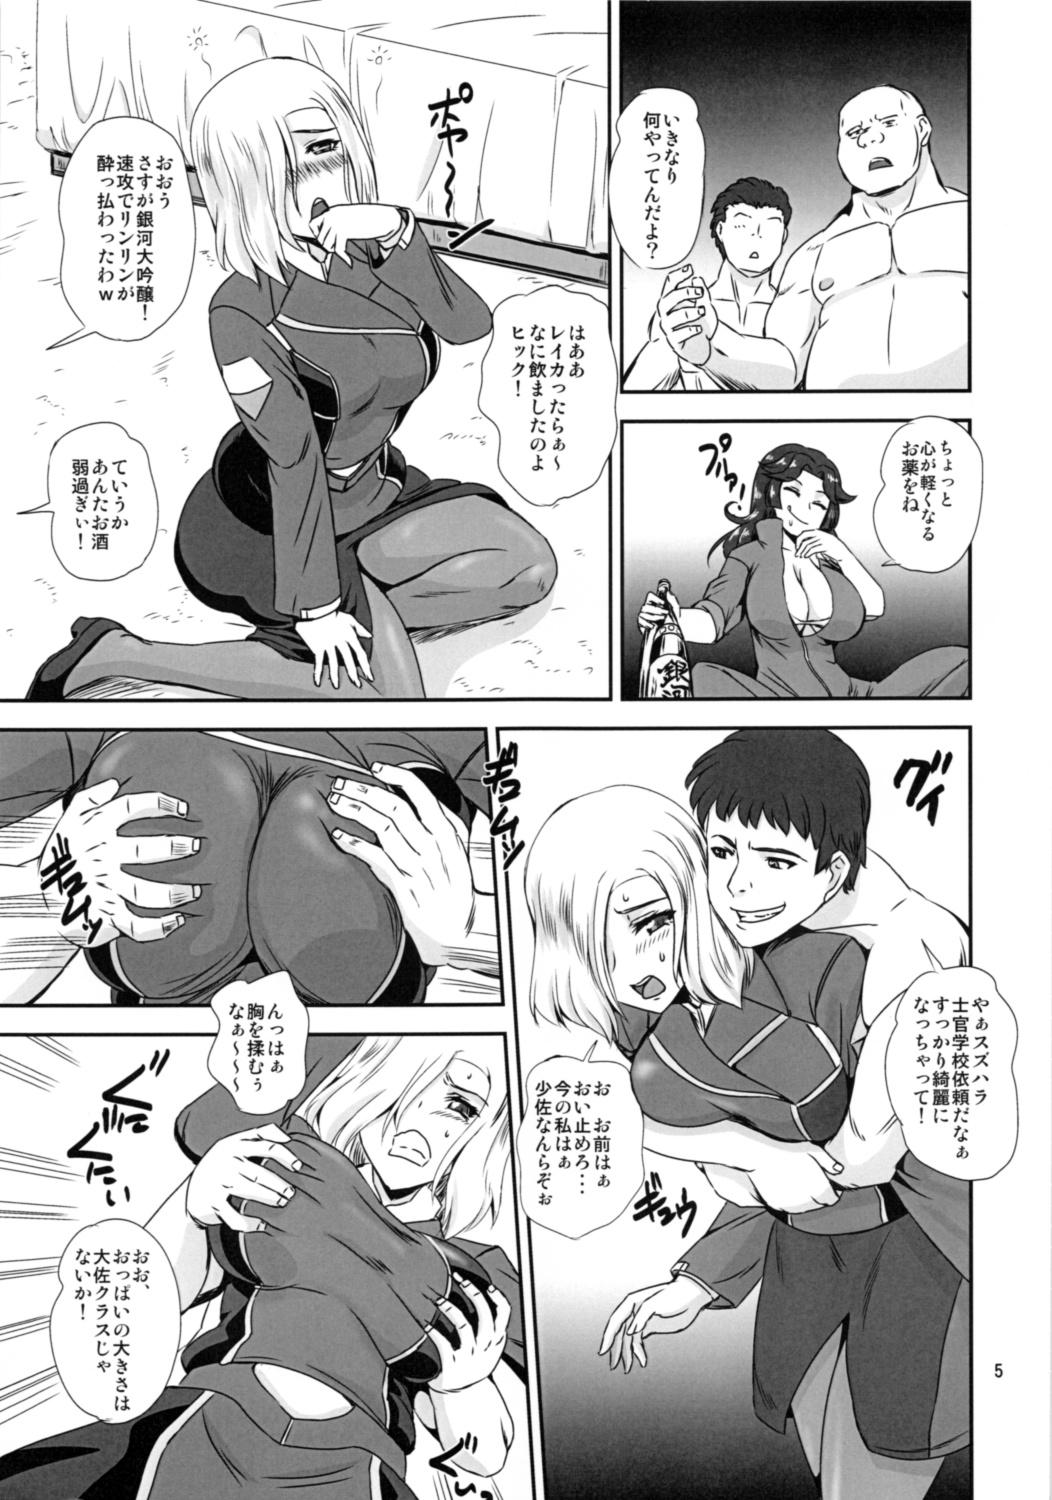 Canadian Majestic RIN RIN - Majestic prince Dominant - Page 4